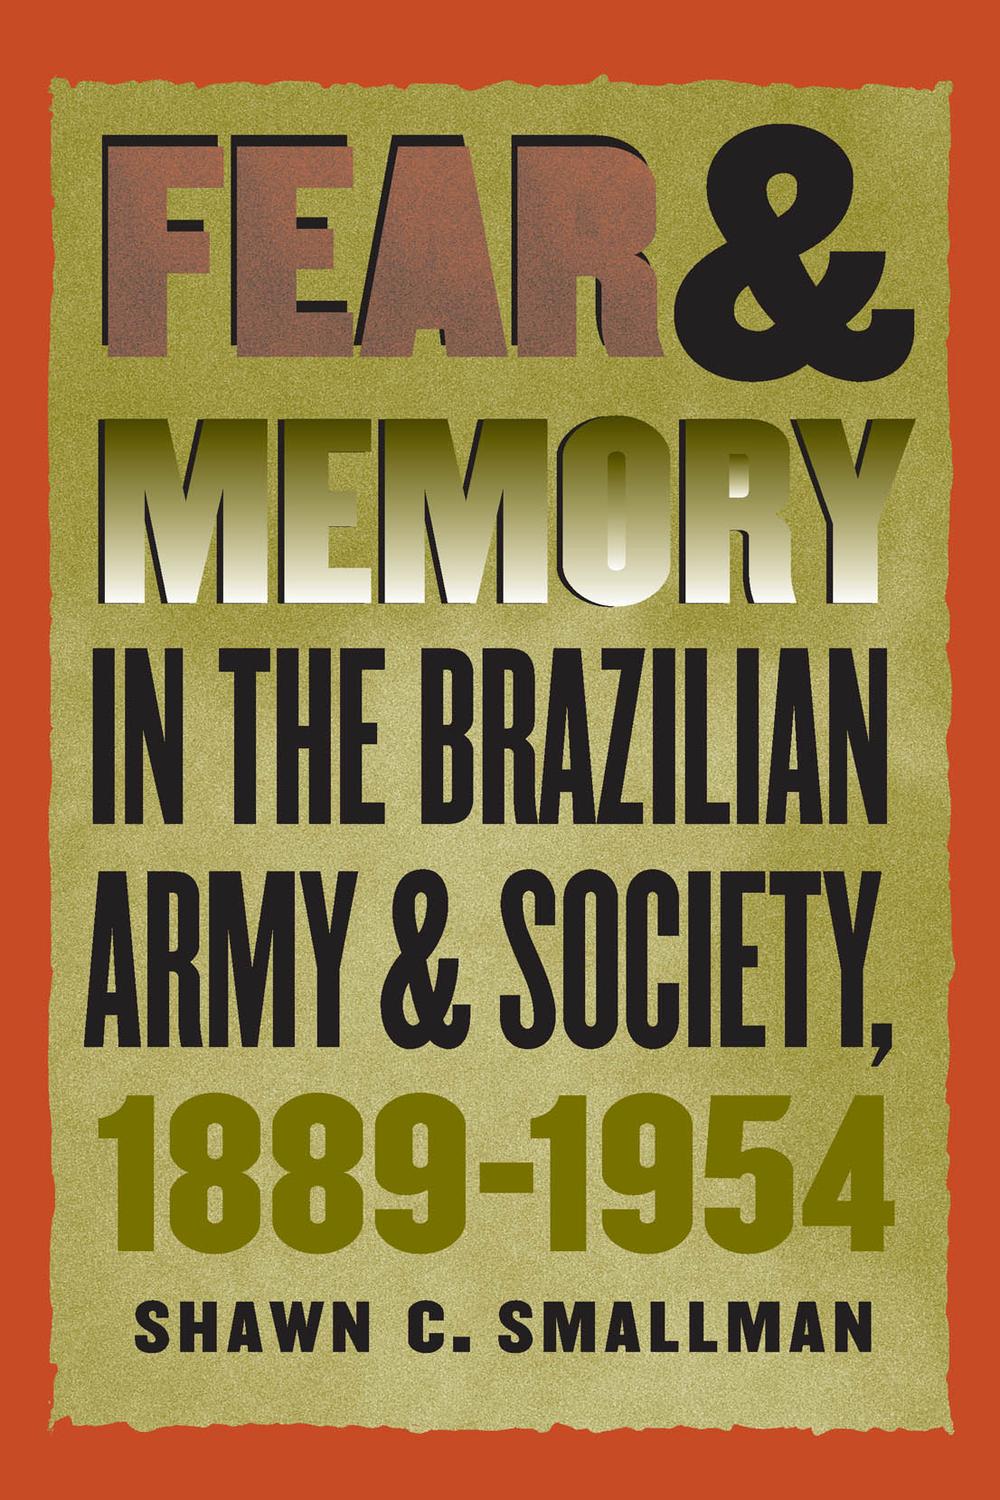 Fear and Memory in the Brazilian Army and Society, 1889-1954 - Shawn C. Smallman